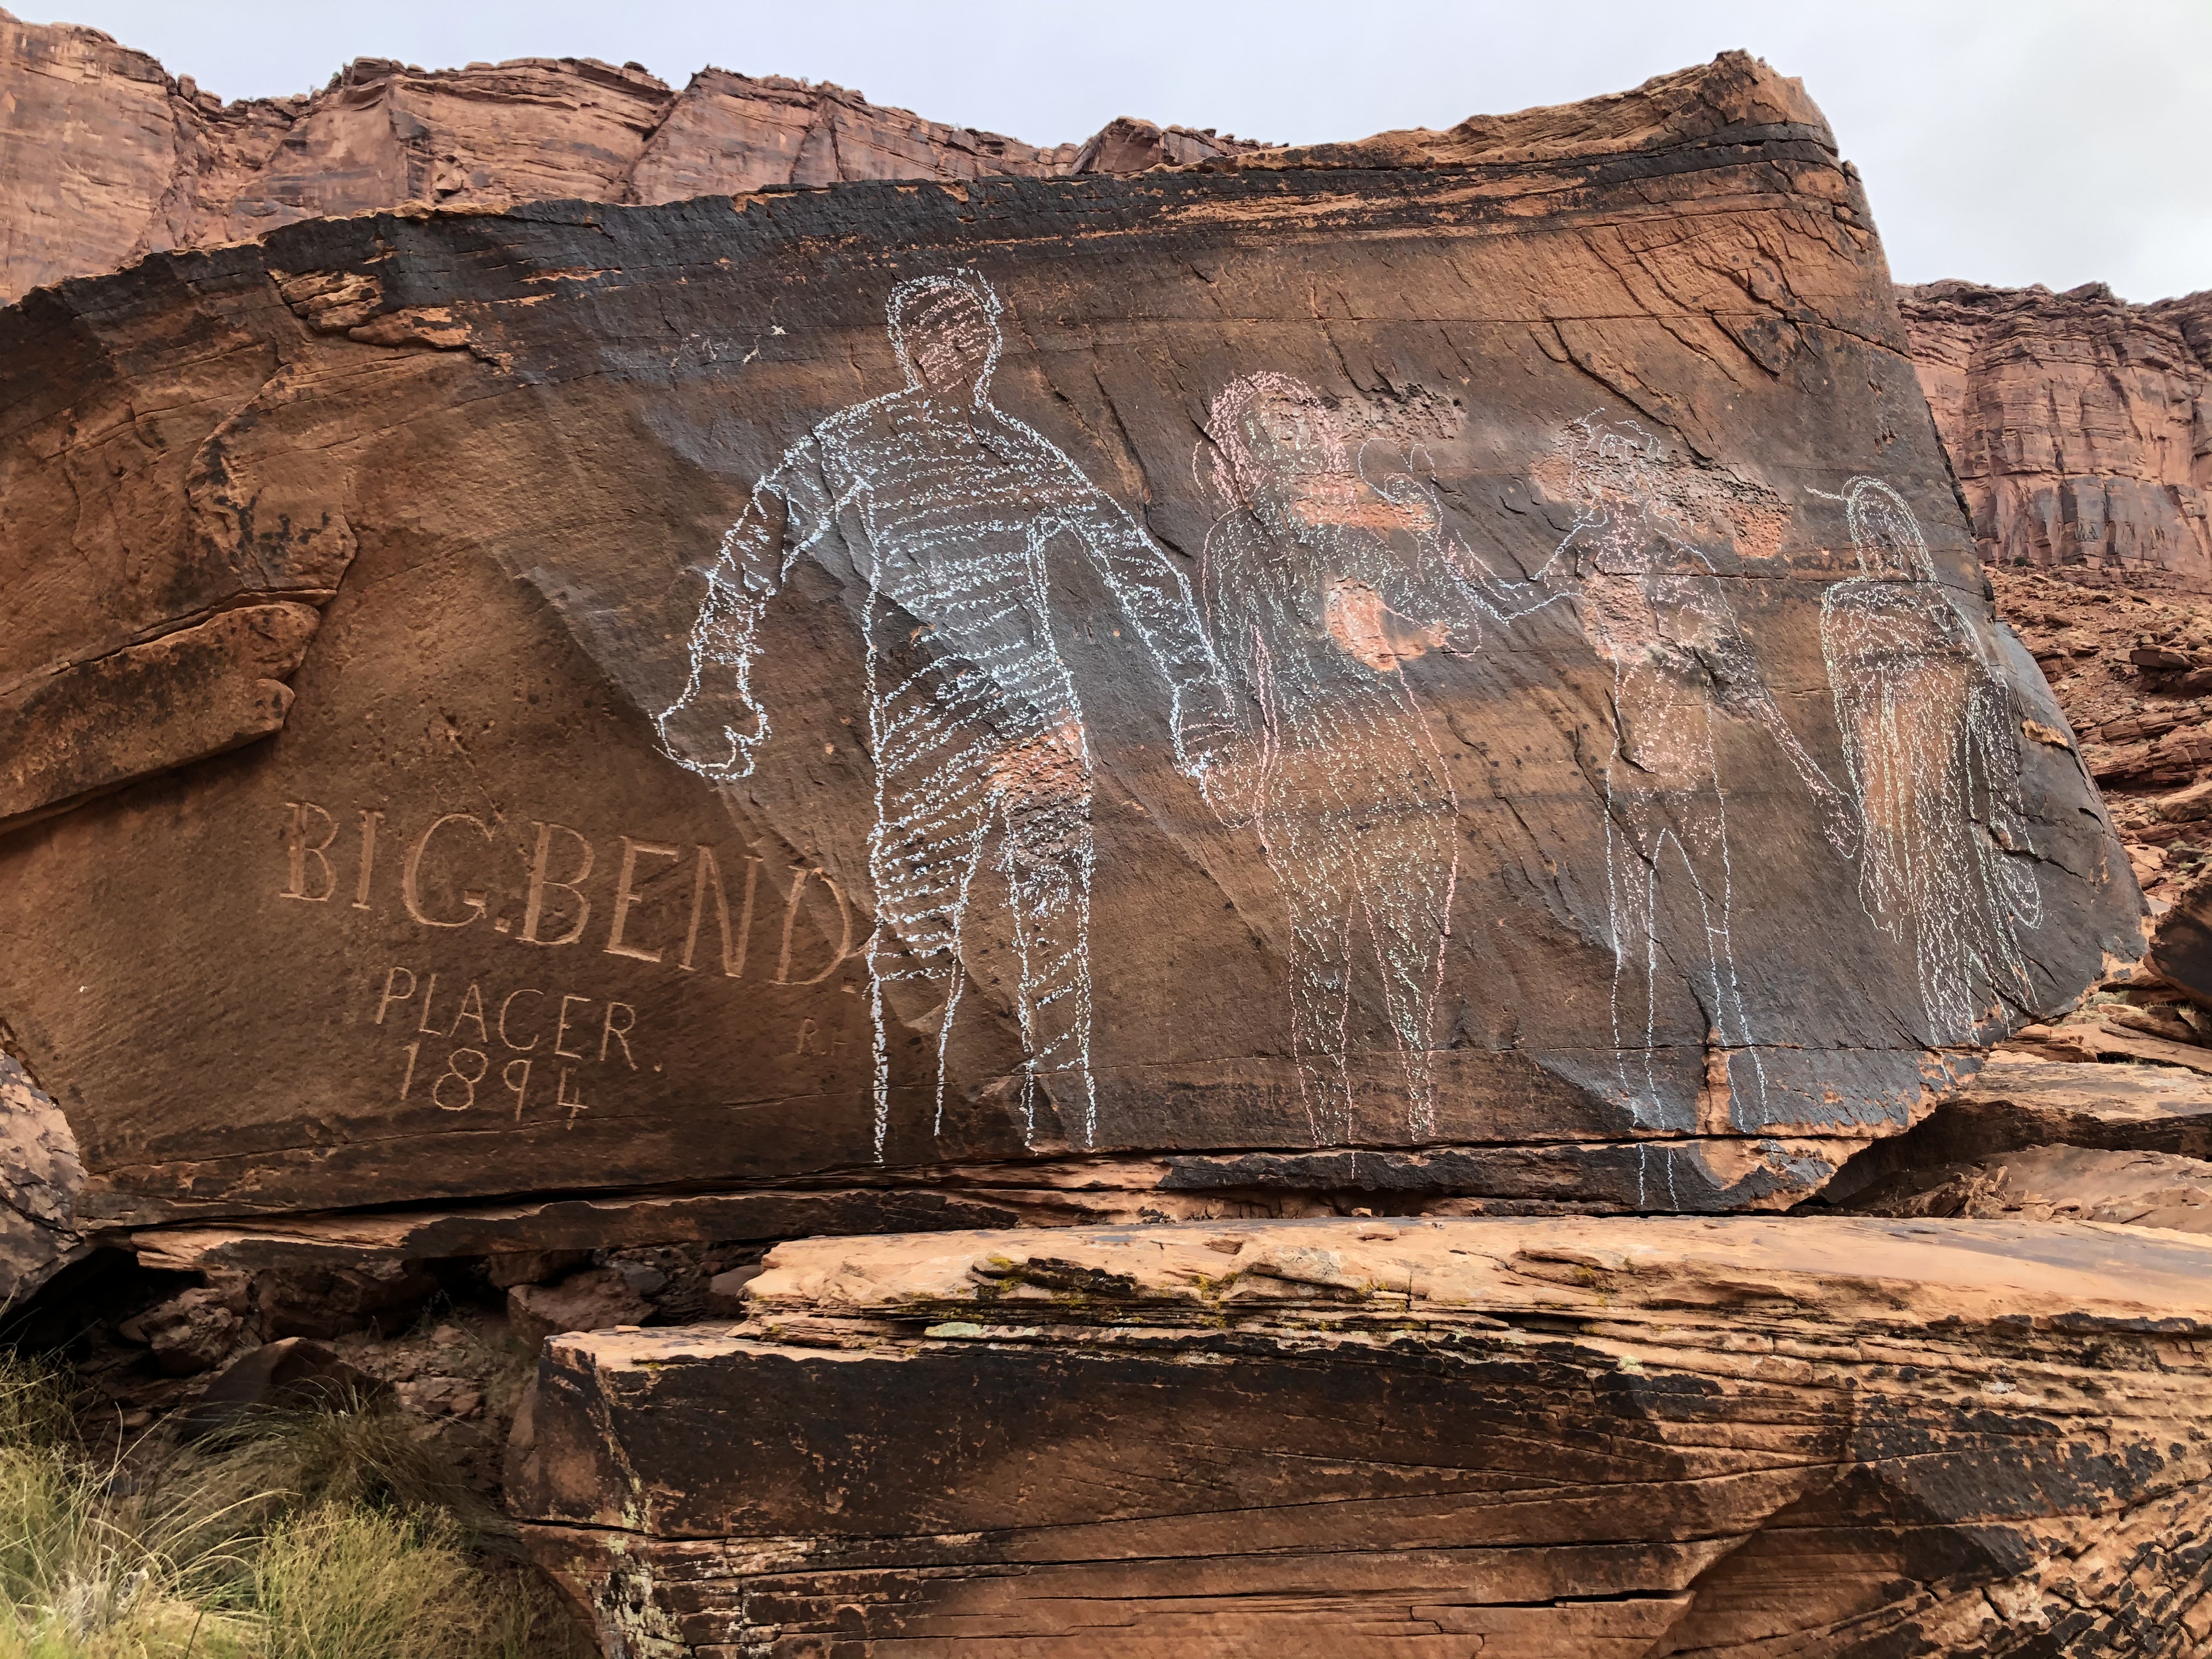 four human figures drawn apparently in chalk next to an inscription at the Big Bend bouldering area off of Highway 128, next to the Colorado River, near Moab, Utah